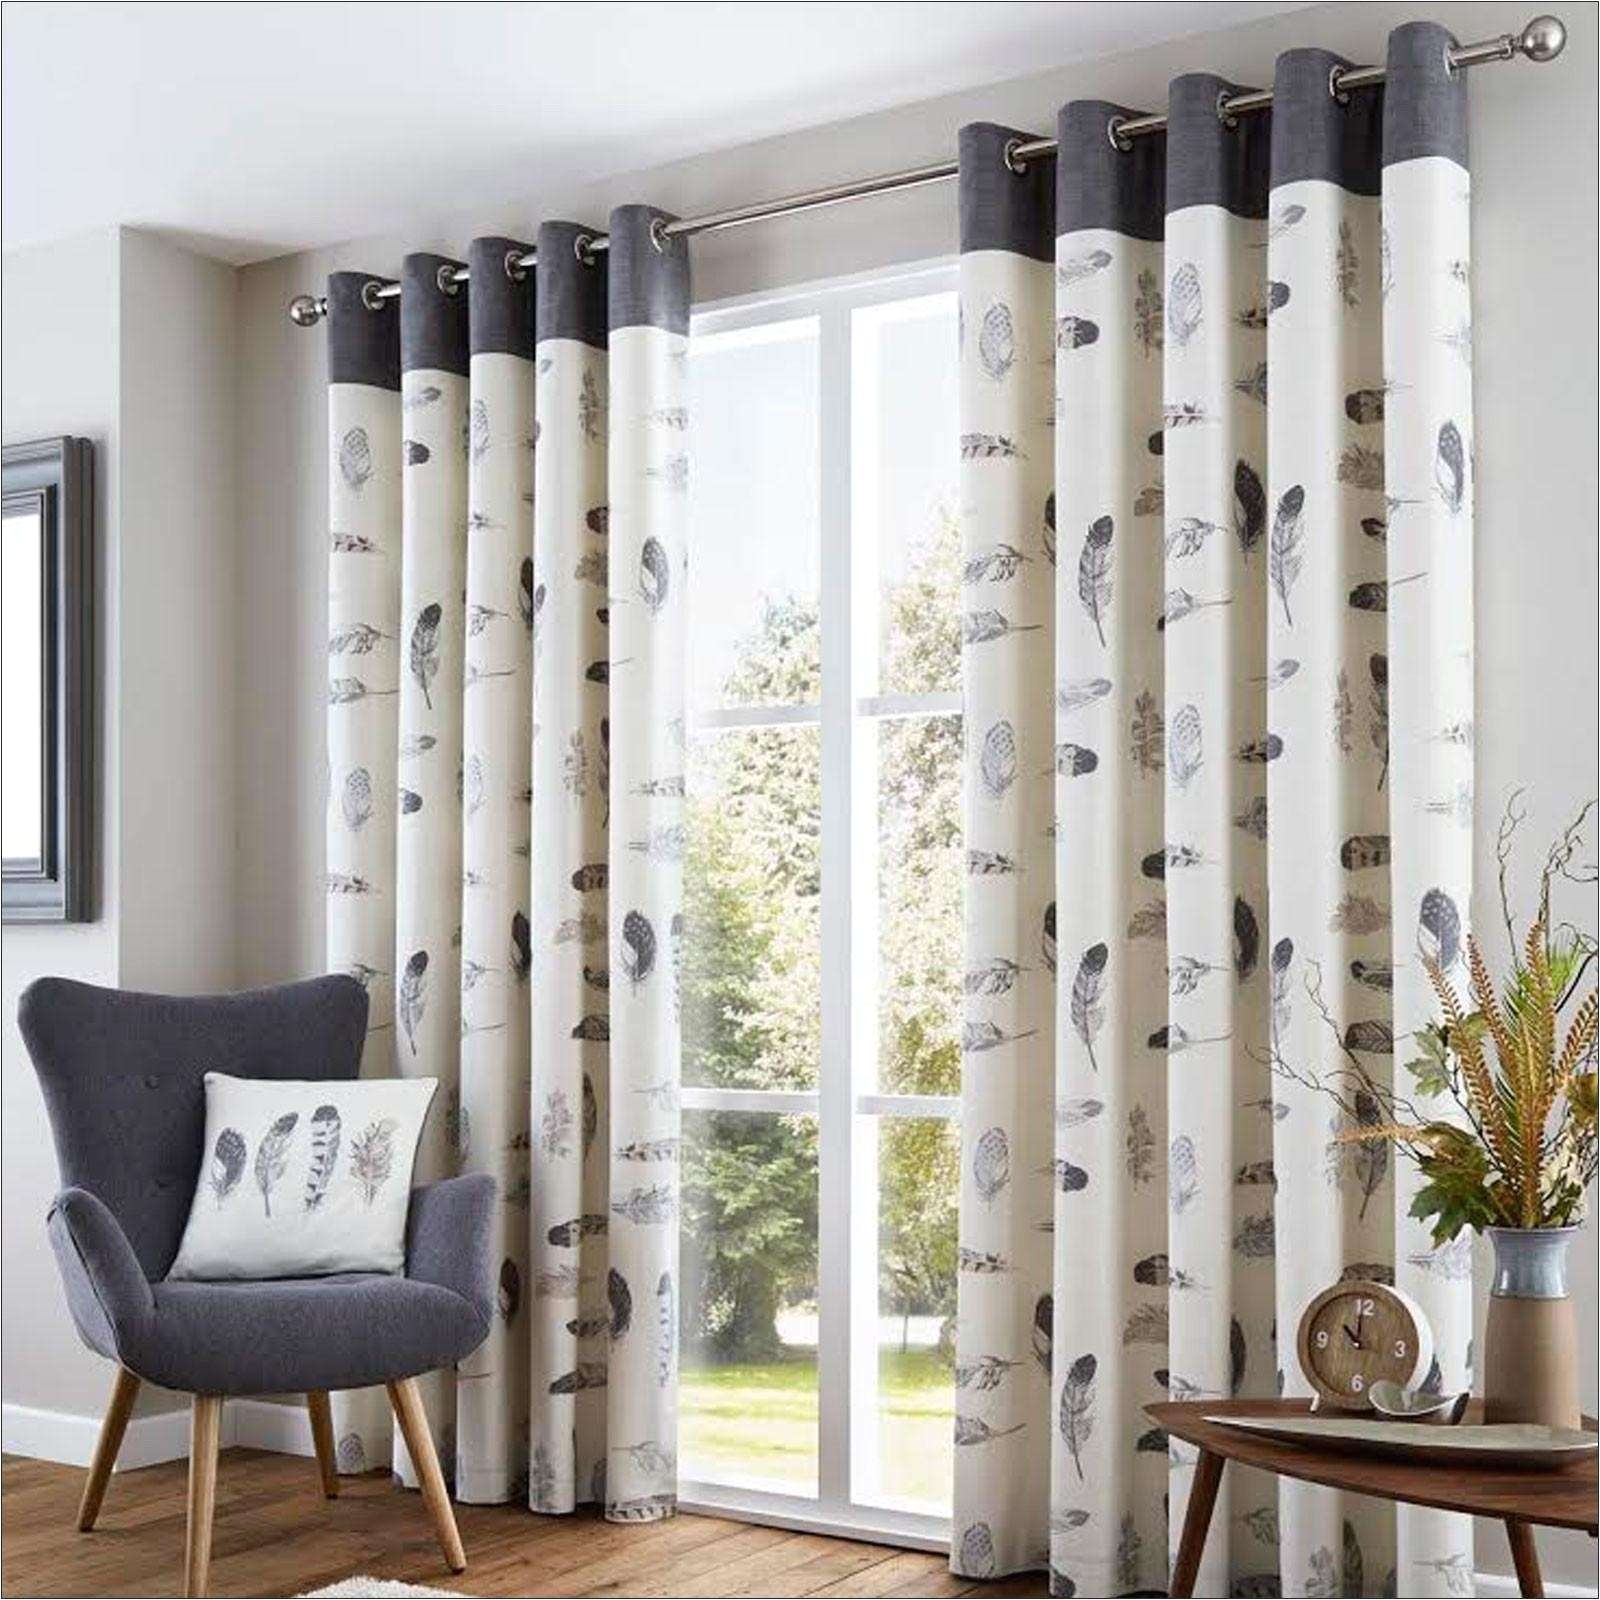 matching curtains to wall color curtain design for living room design ideas of curtains ideas for